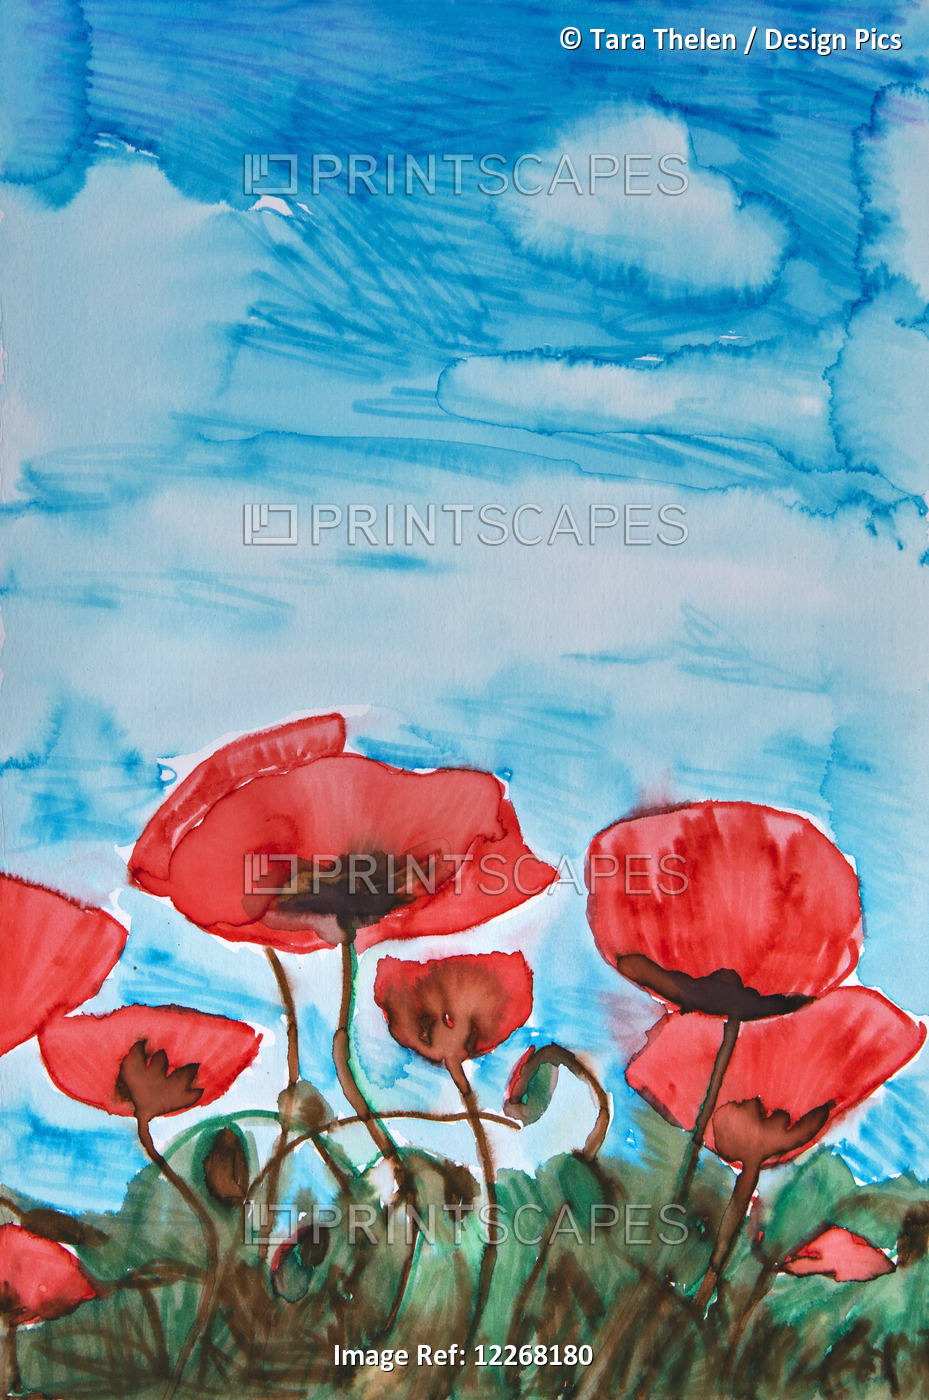 Painting Of Red Poppies And A Blue Sky